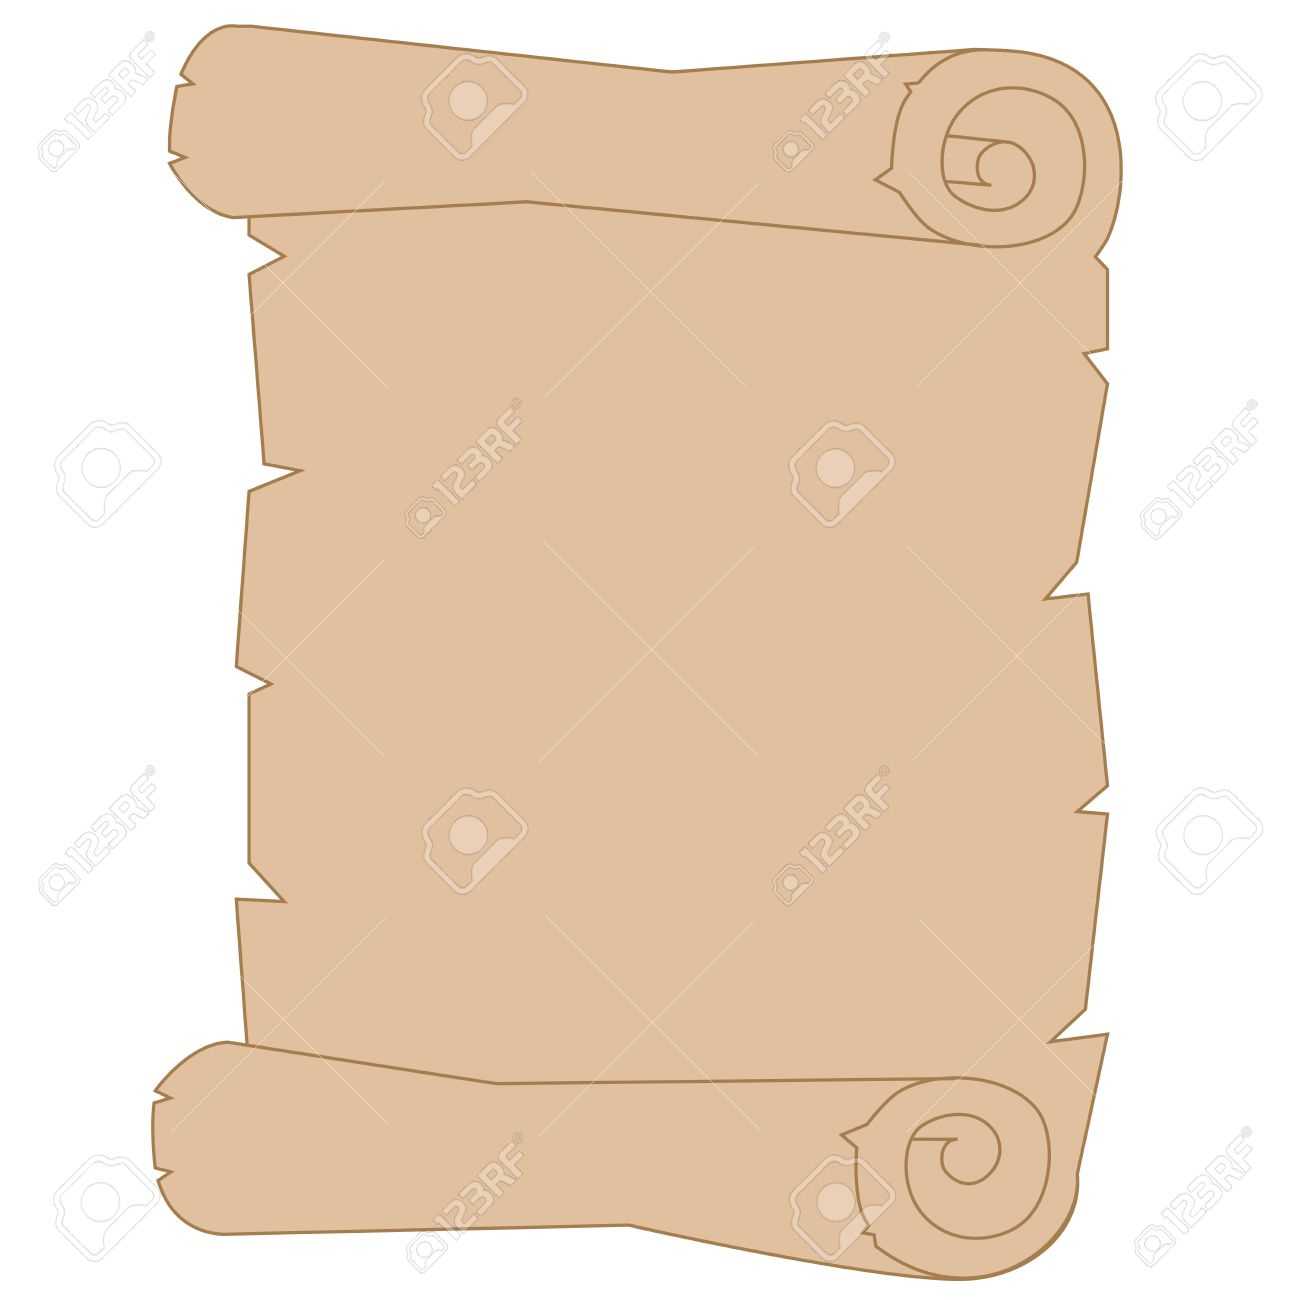 Blank Treasure Map Throughout Blank Pirate Map Template